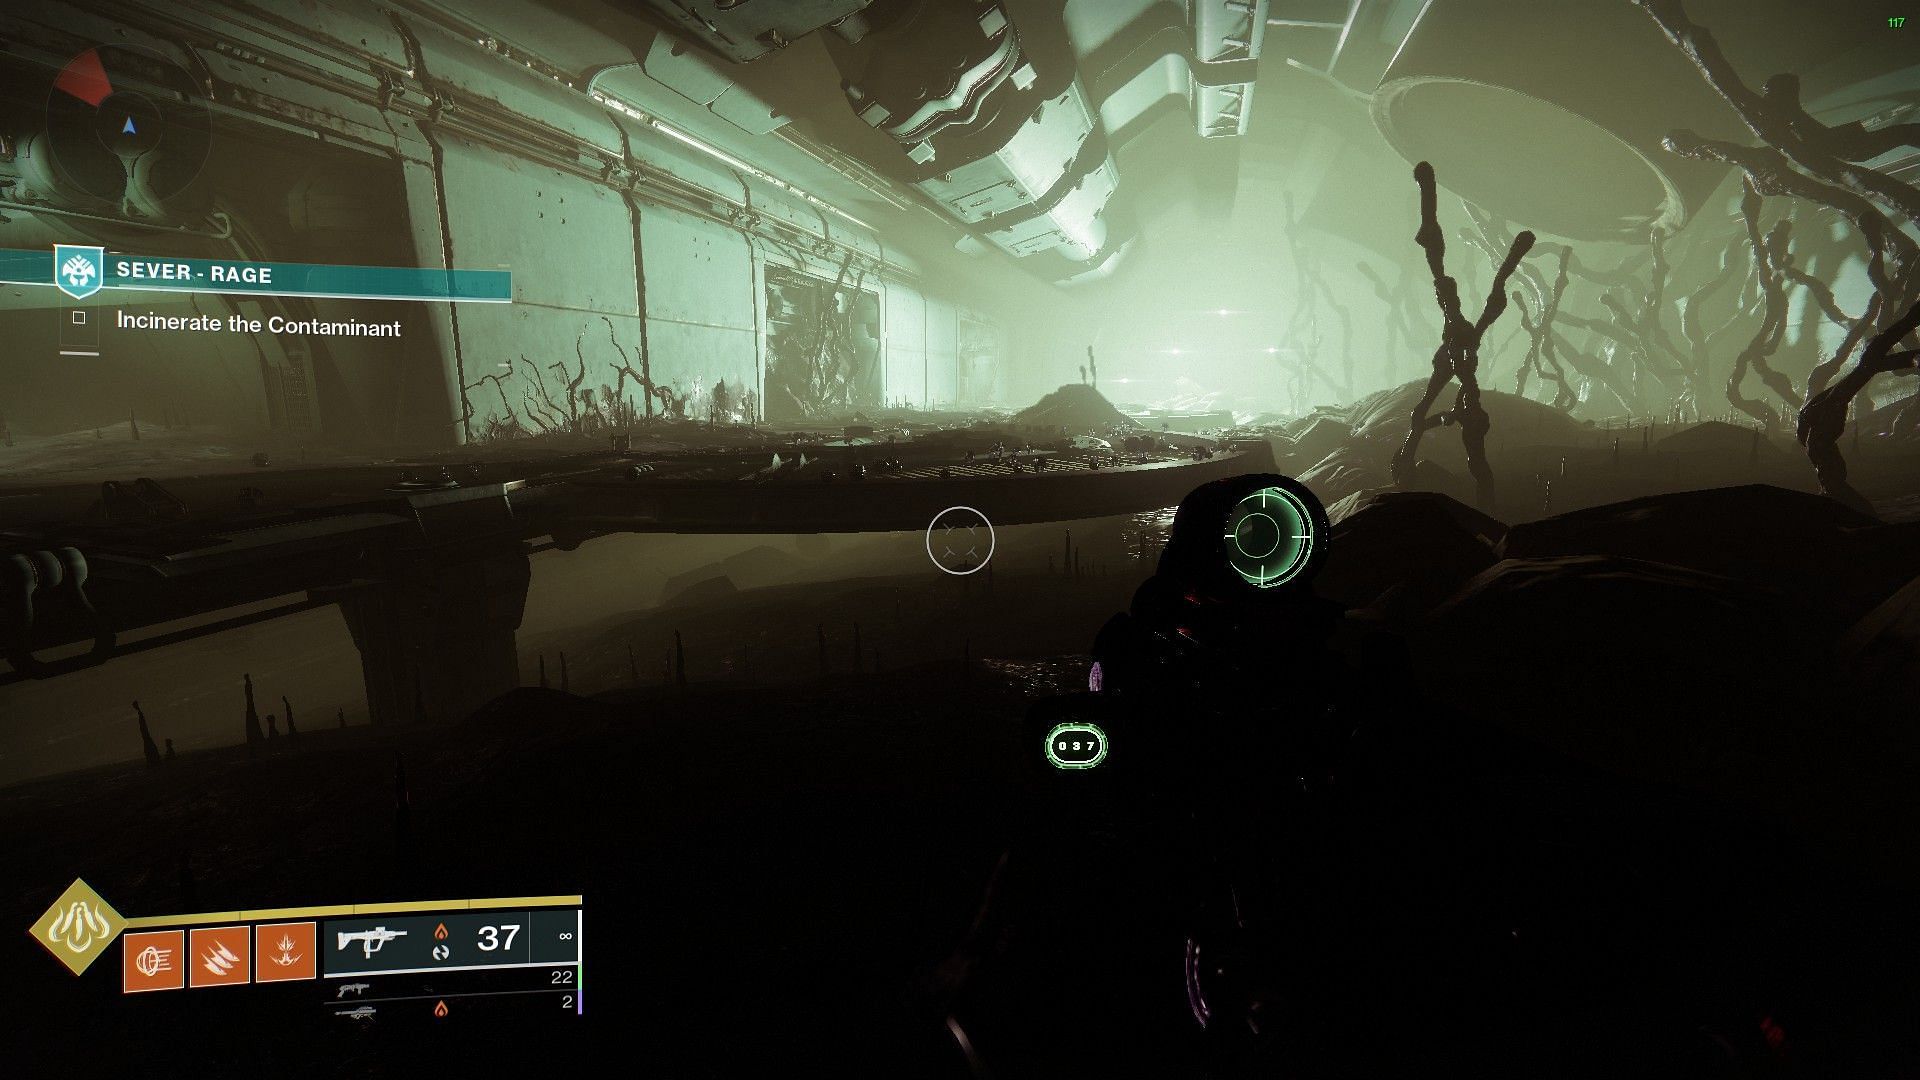 Platform in the infested room (Image via Bungie)